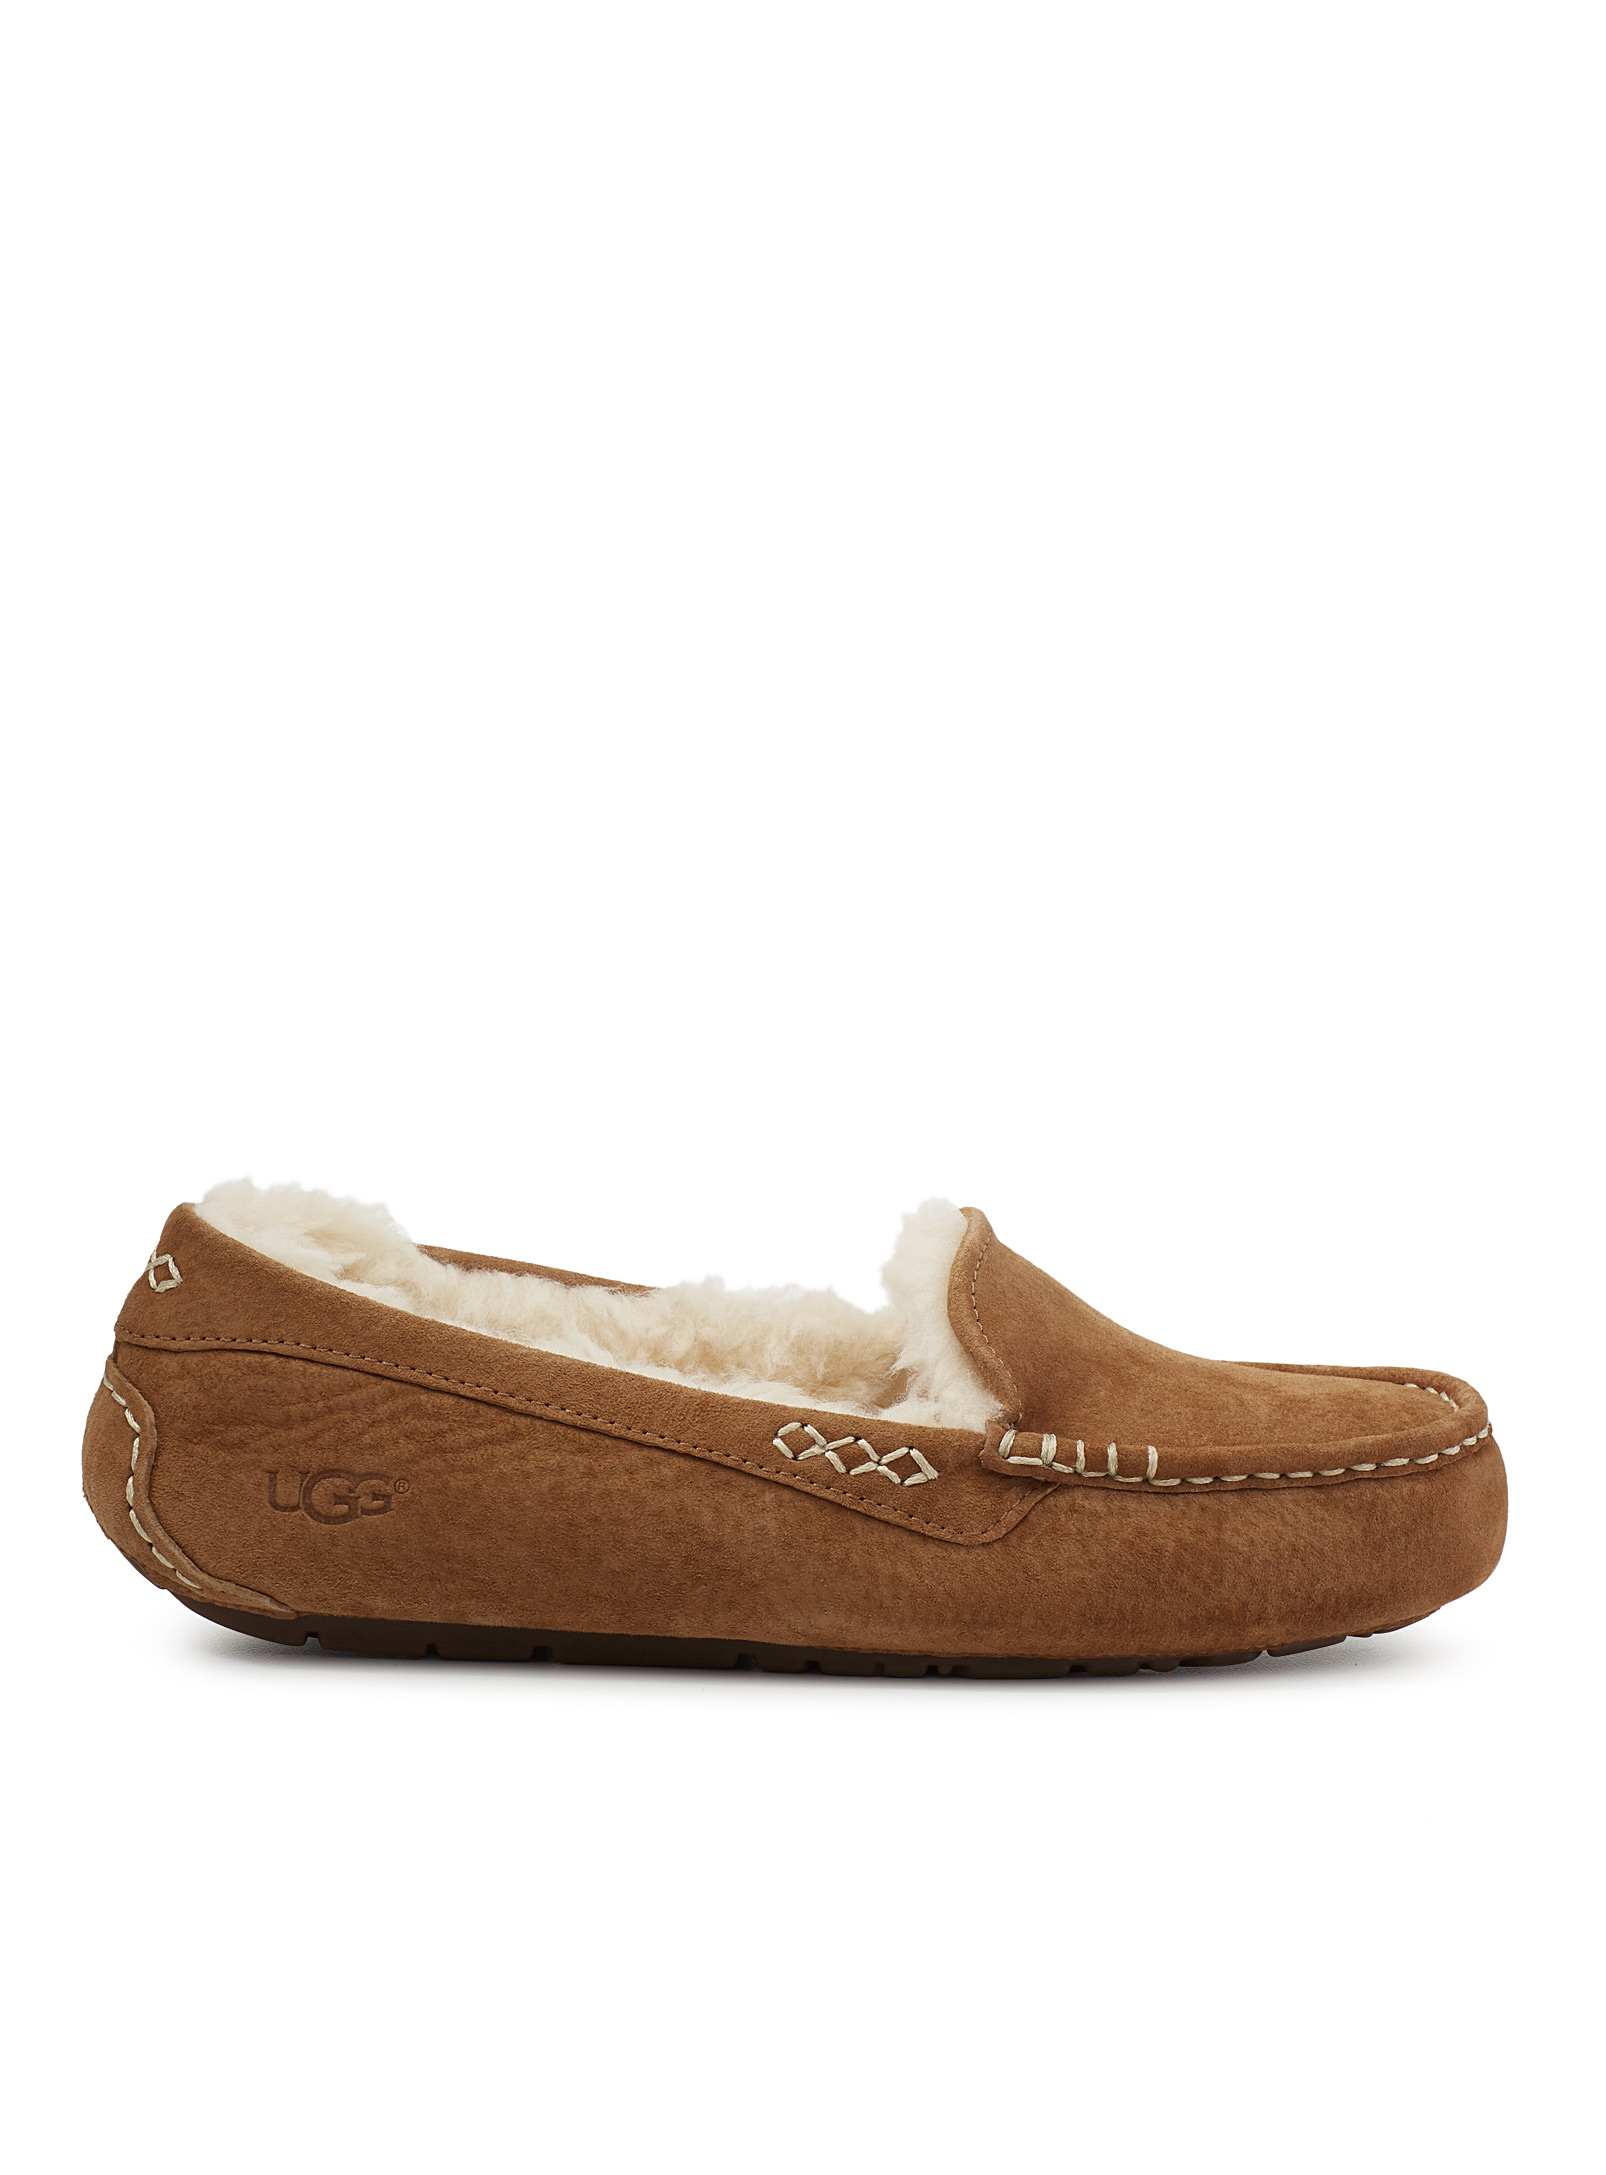 UGG - Women's Ansley moccasin slippers